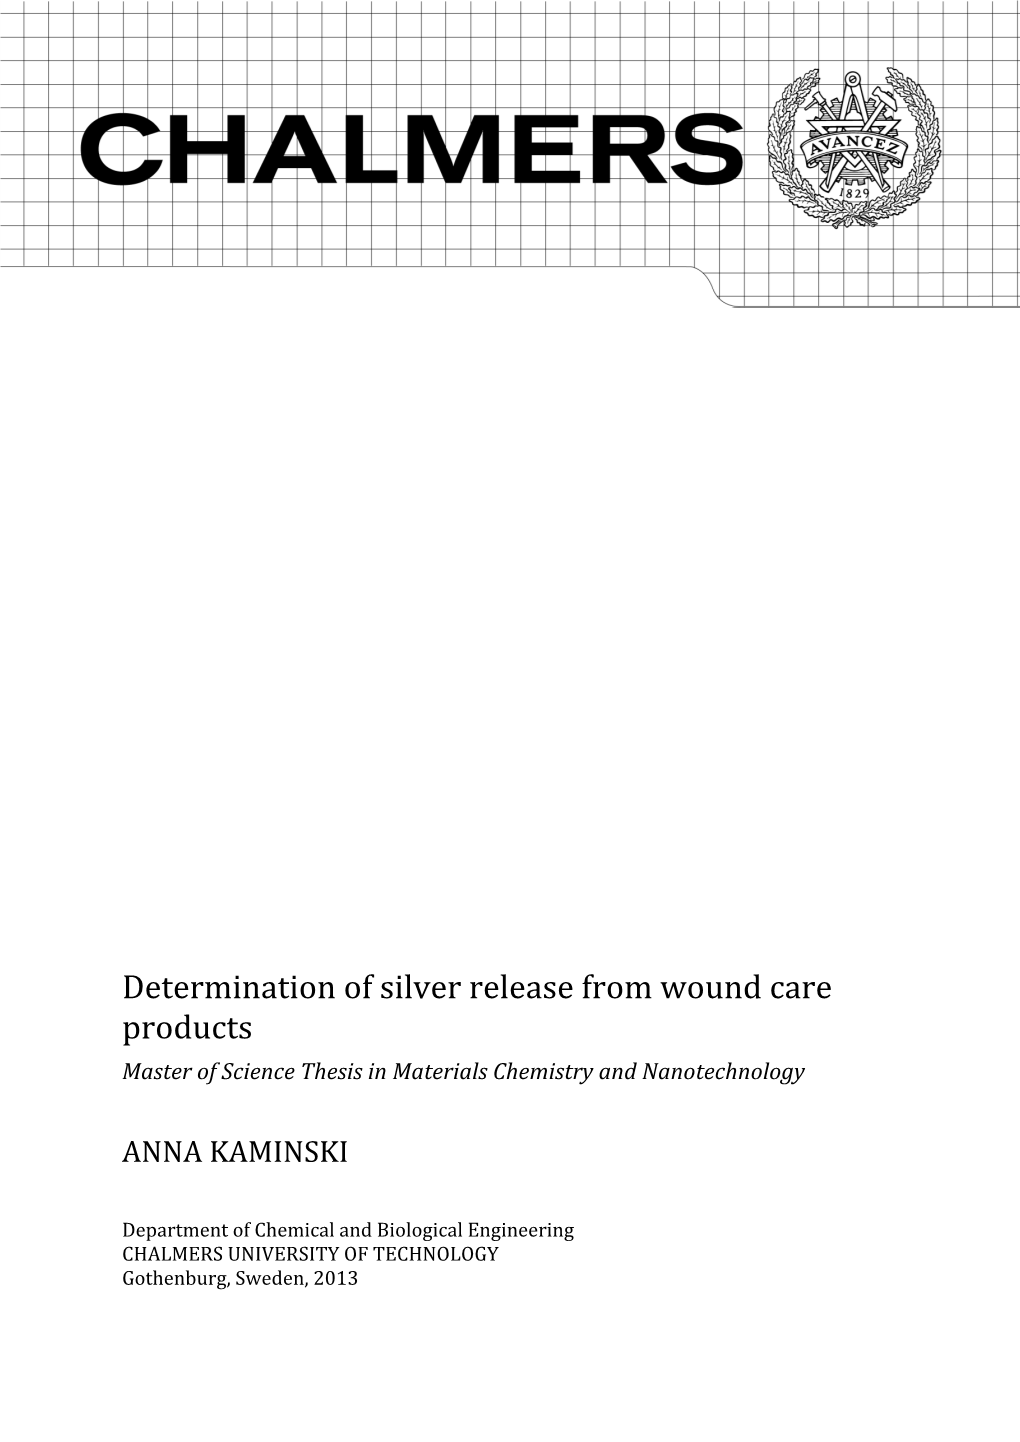 Determination of Silver Release from Wound Care Products Master of Science Thesis in Materials Chemistry and Nanotechnology